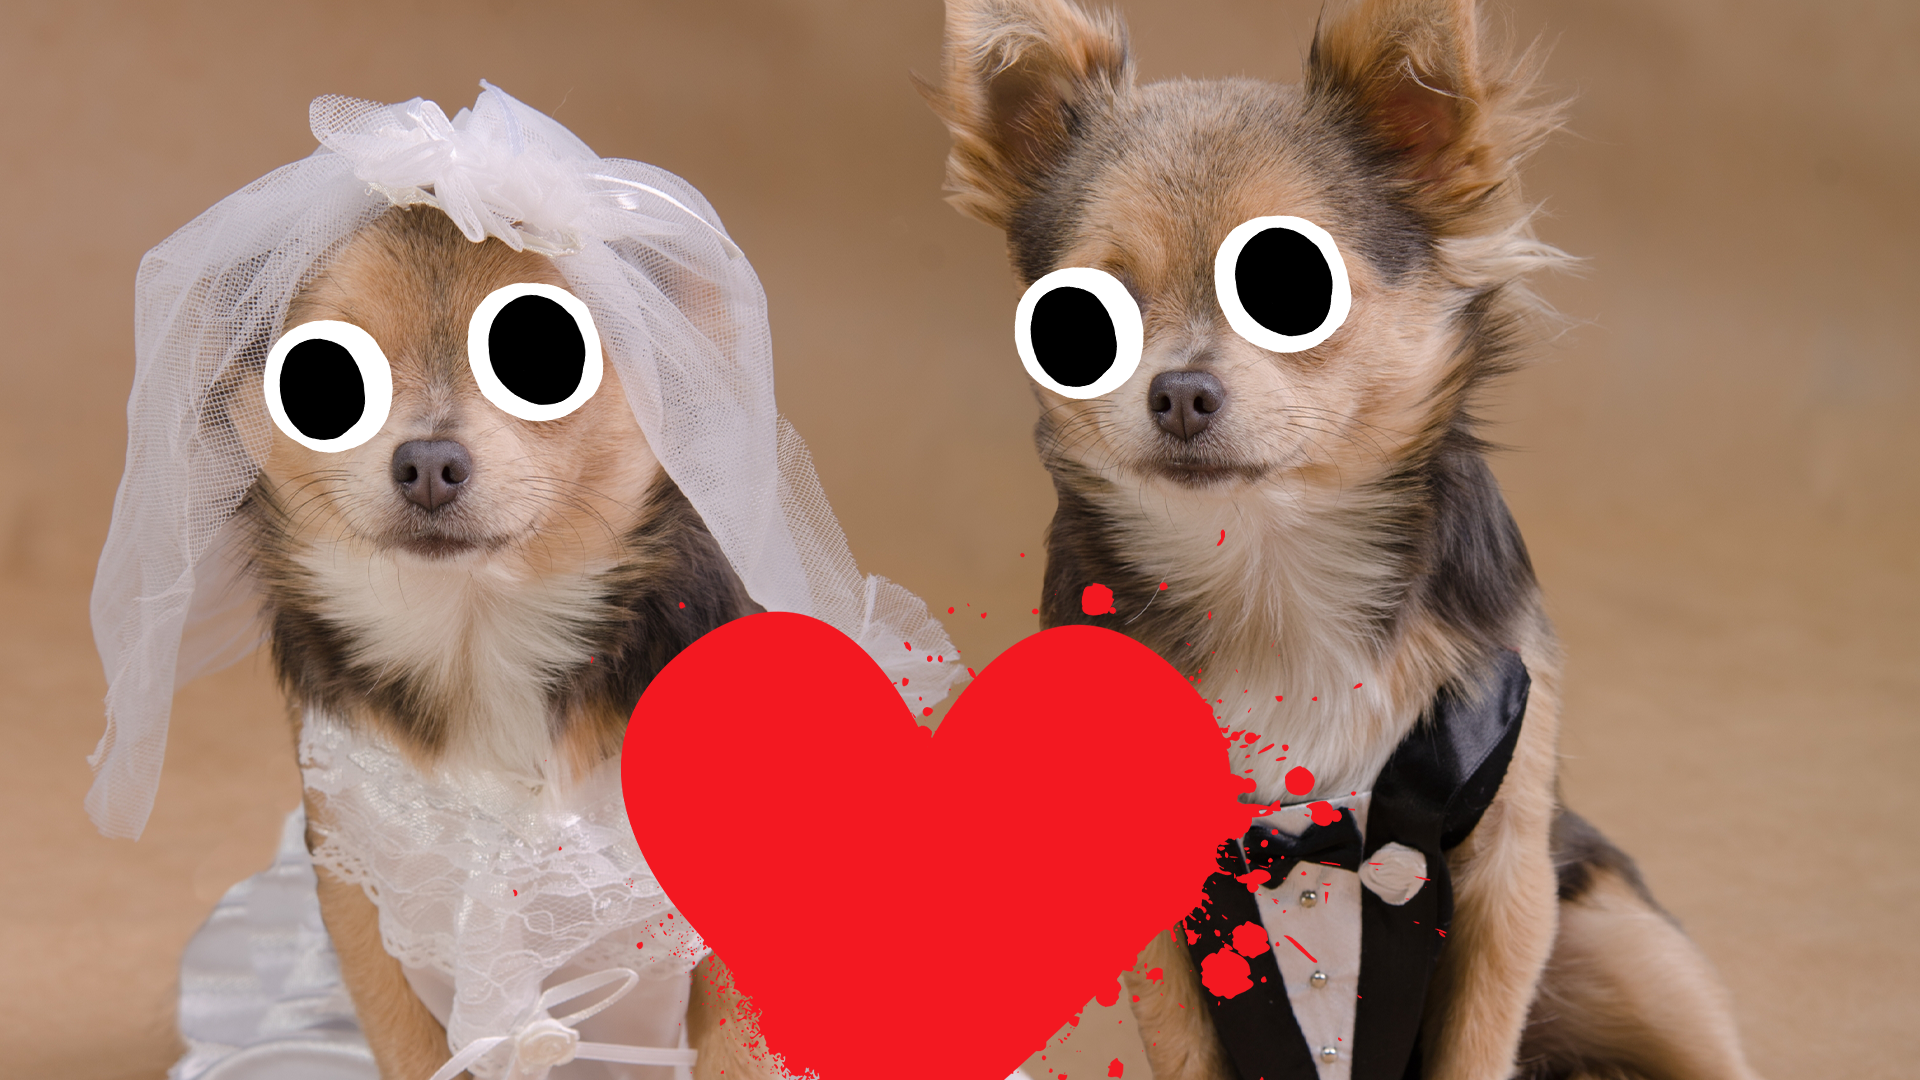 Two dogs getting married with Beano heart